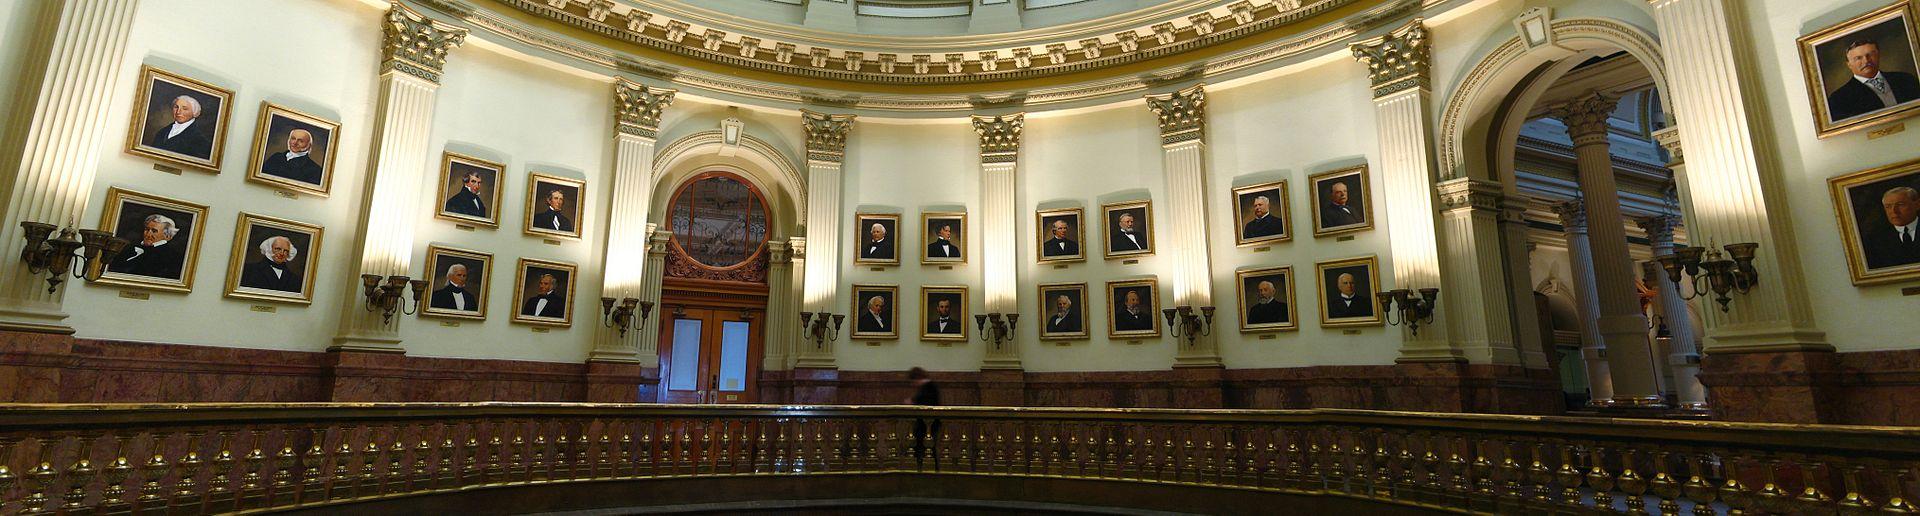 Twenty two portraits of presidents are seen hanging in the Capitol 